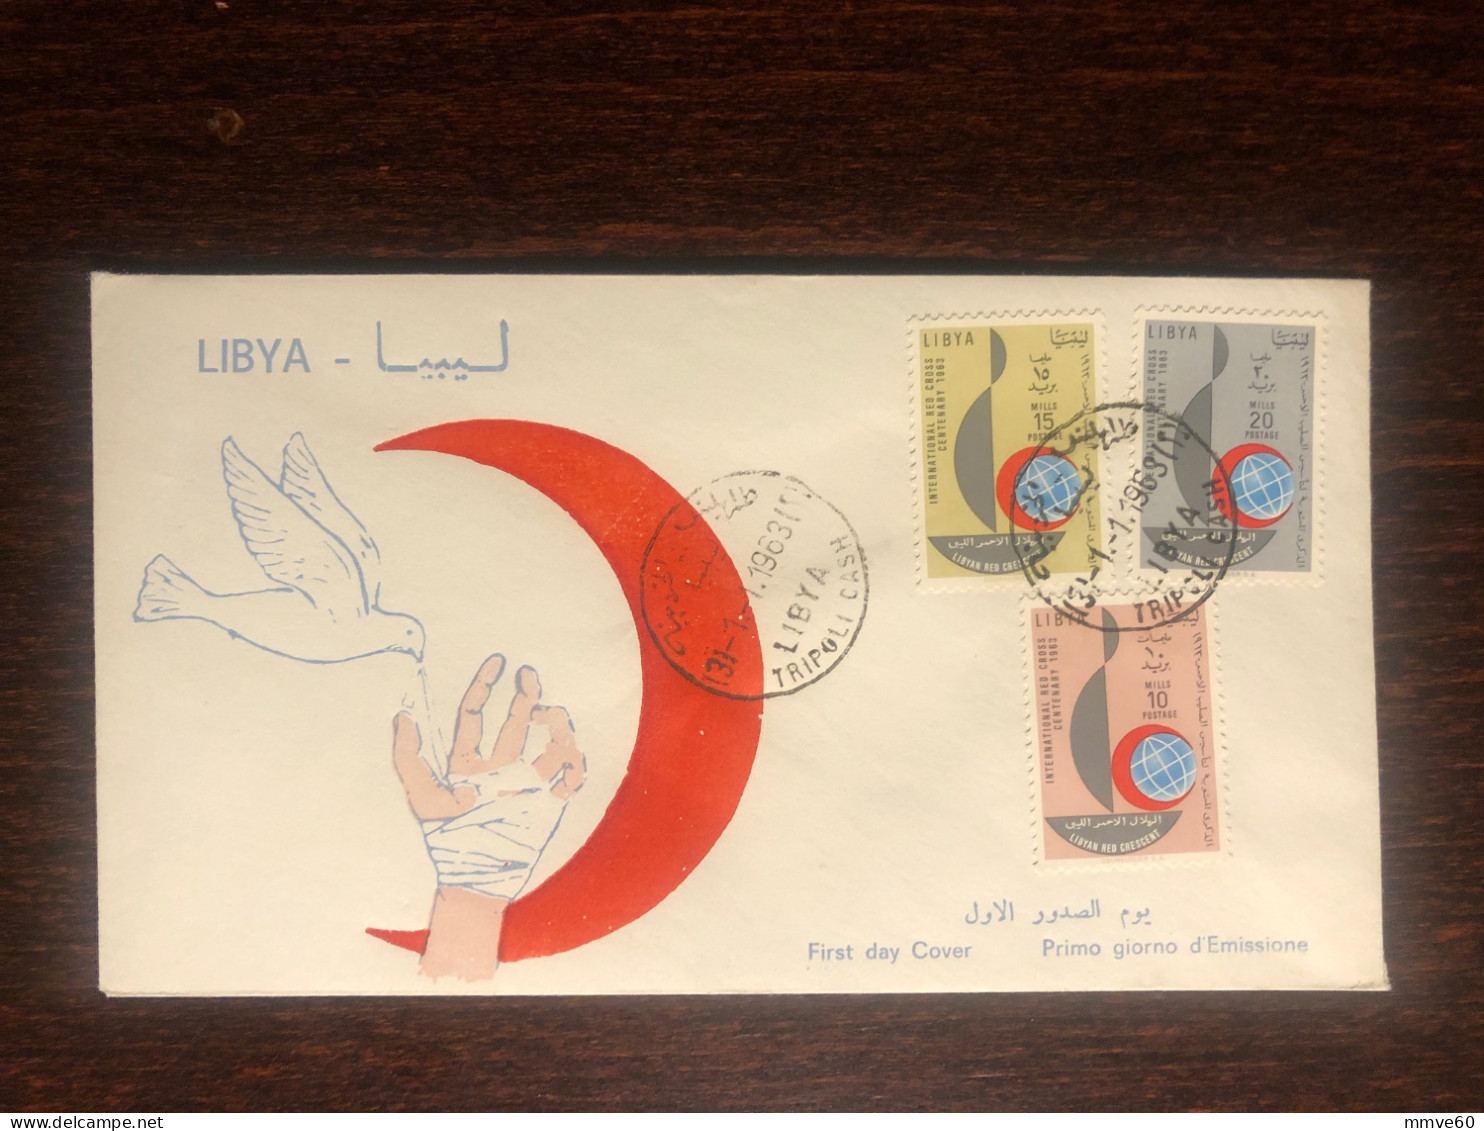 LIBYA  FDC COVER 1963 YEAR RED CRESCENT RED CROSS HEALTH MEDICINE STAMPS - Libyen